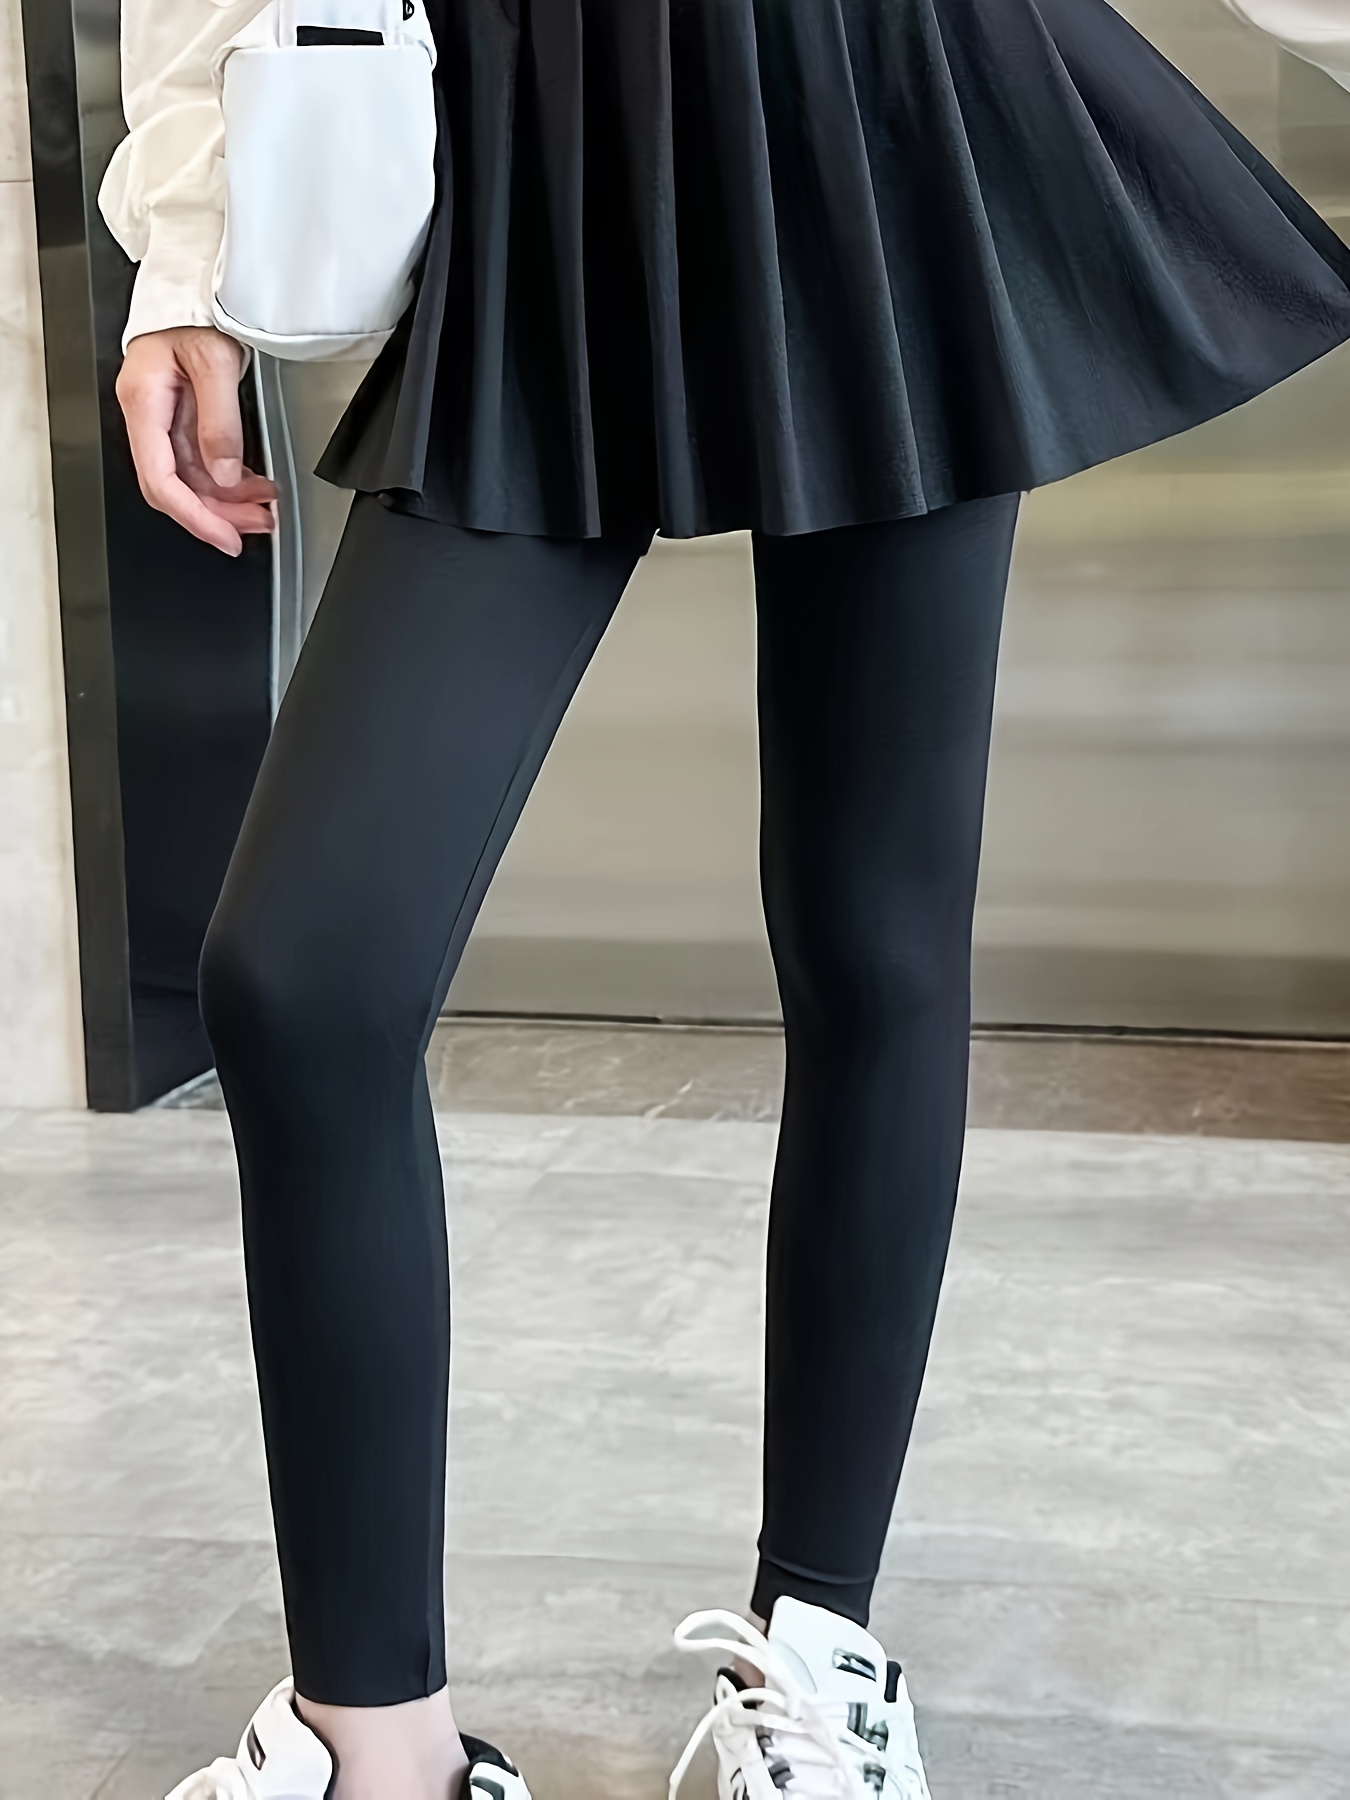 Women's Fleece Lined Skort Skirt Leggings Fake Two-Piece Padded Thickened  one-Piece Bottoming Warm Skirt Trousers